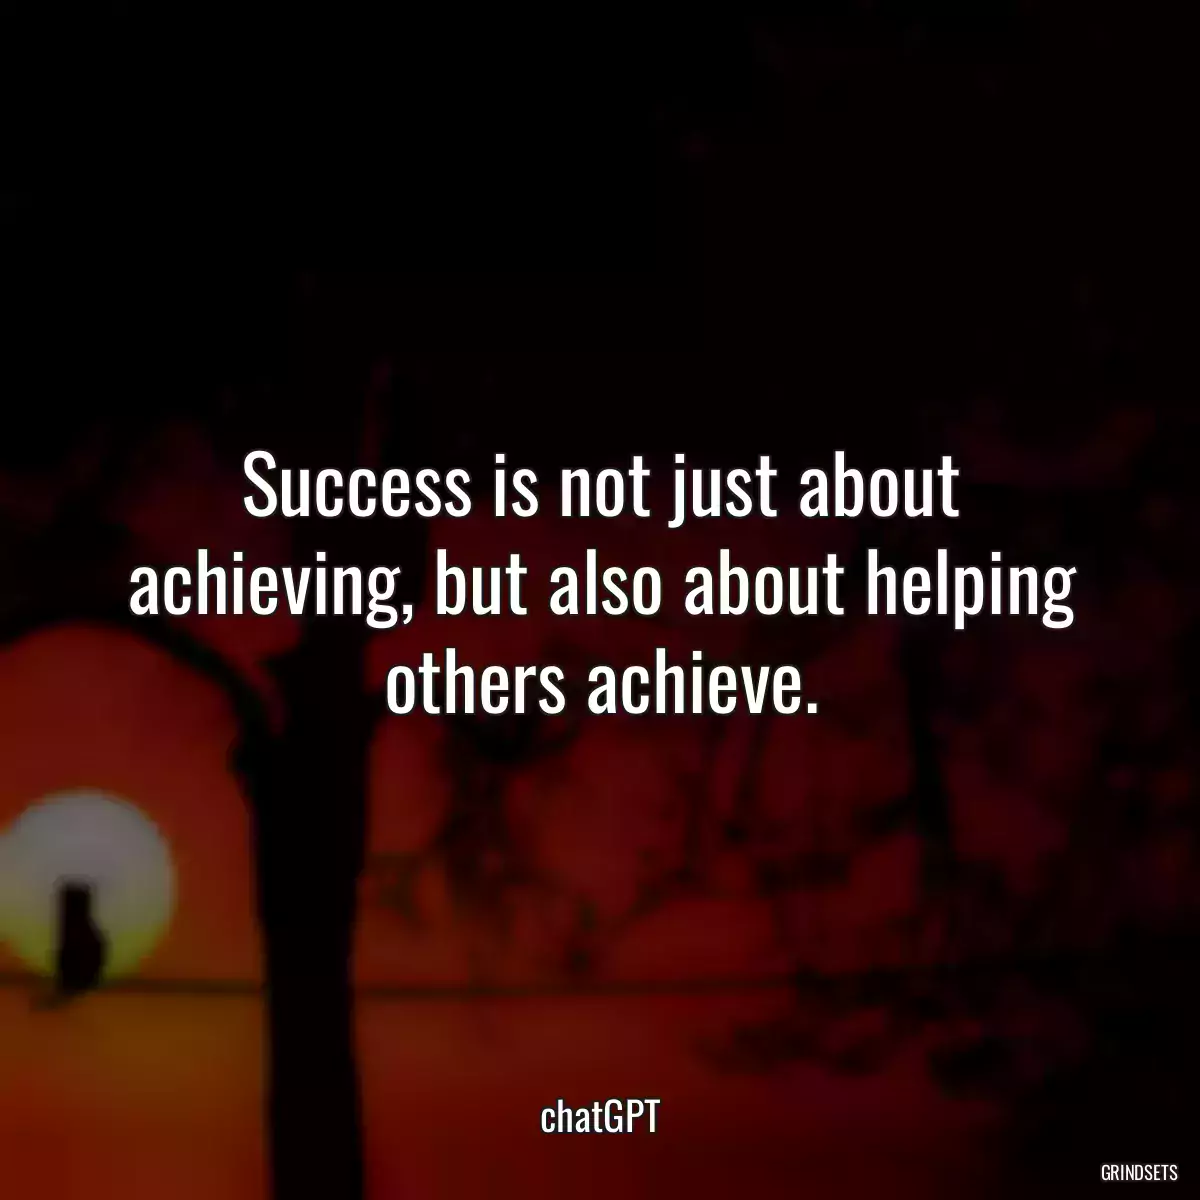 Success is not just about achieving, but also about helping others achieve.